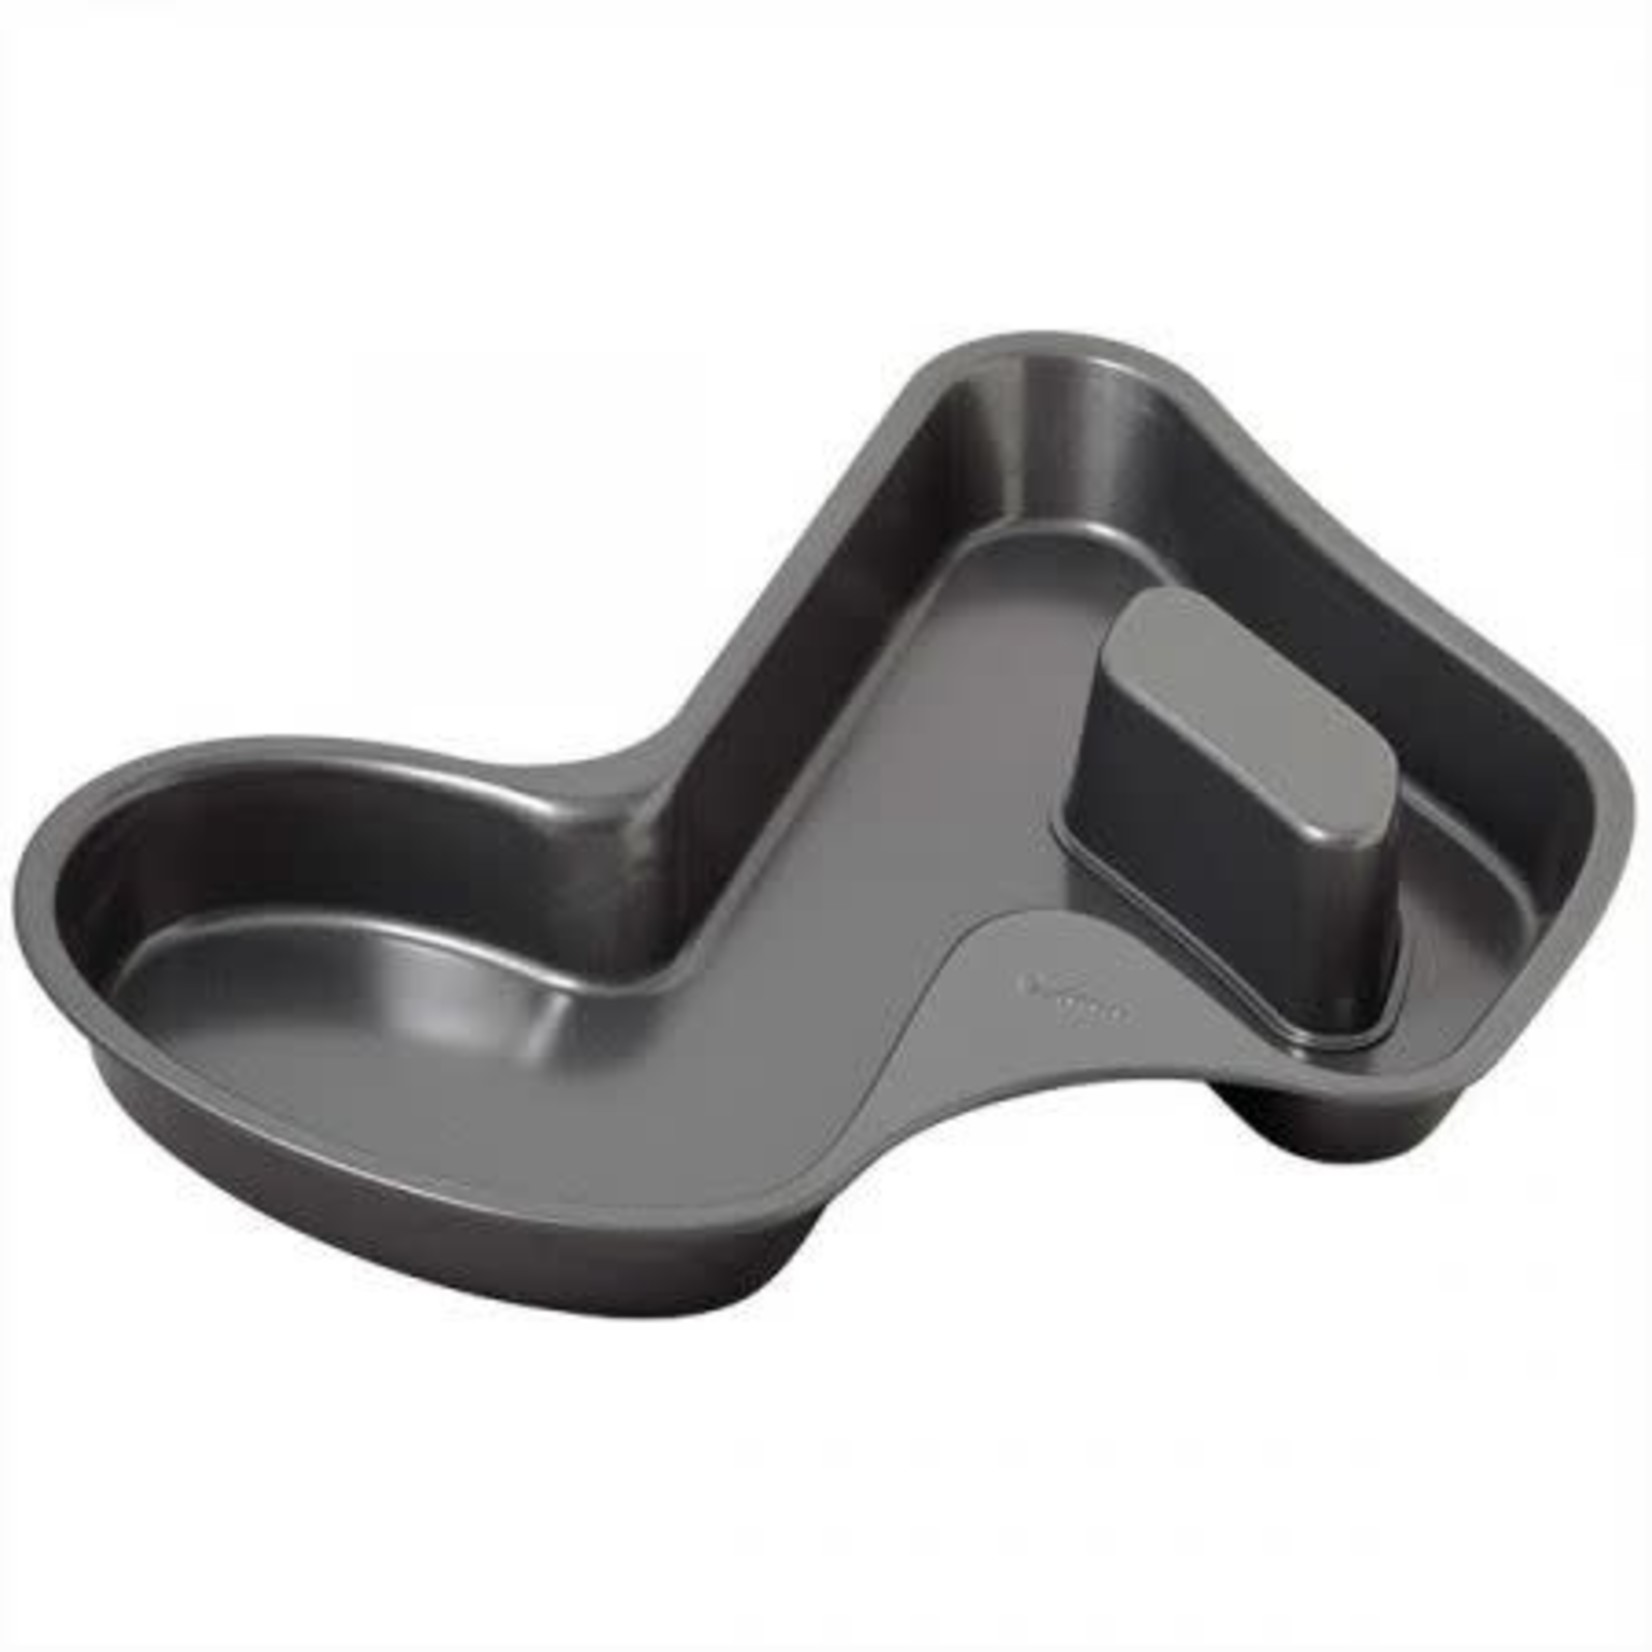 Wilton Wilton 2105-0054 Musical Note-Shaped Cake Pan - The Westview Shop